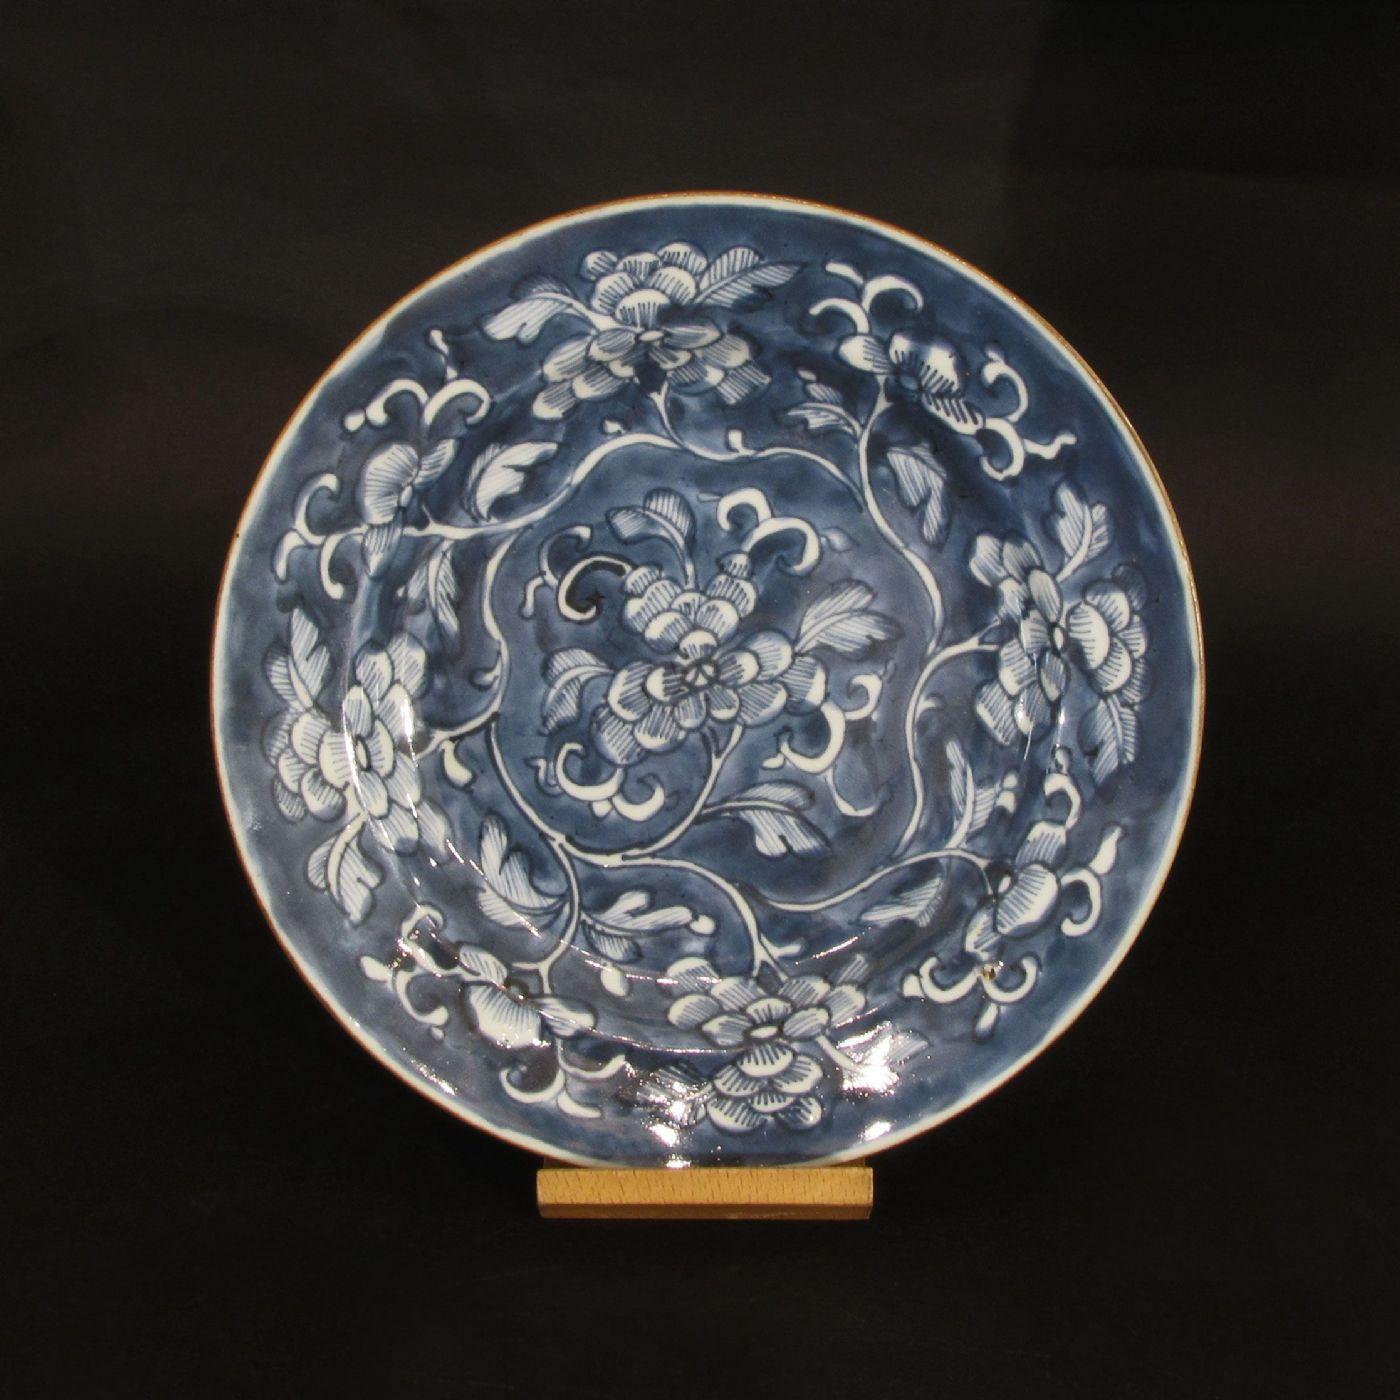 Set of six plates in Chinese porcelain, three of which painted with landscapes and three with blue monochromatic floral motifs.
In good condition, products for the local market.

MEASUREMENTS: Diameter cm 23.